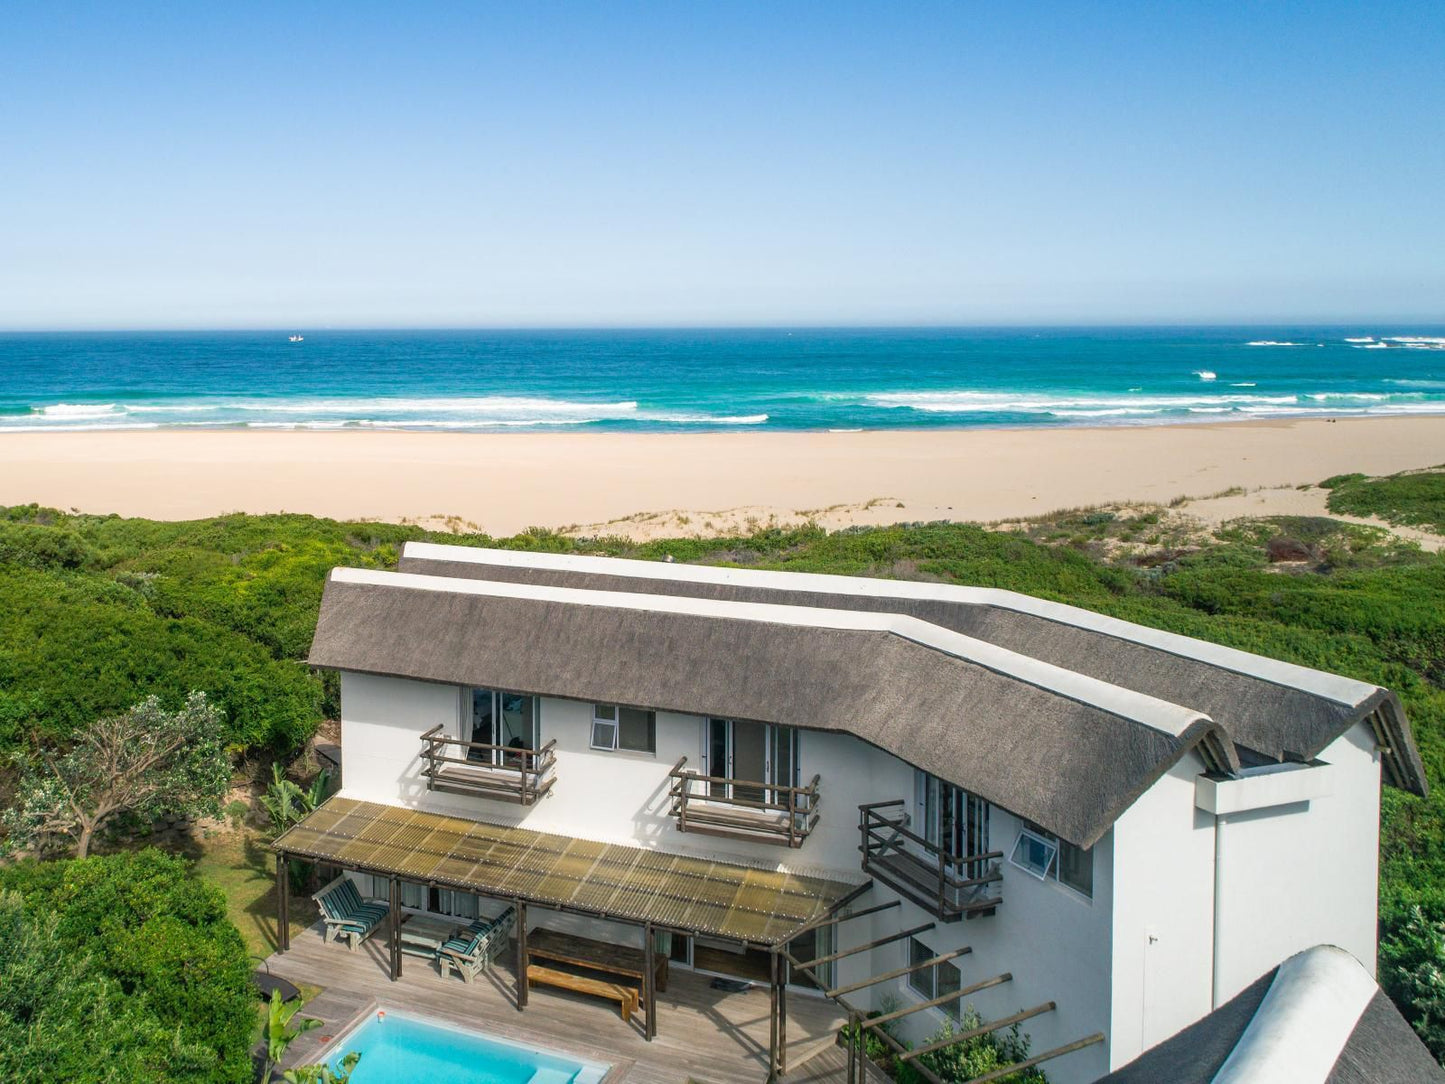 Beach Break Guest Houses And Villas Cape St Francis Eastern Cape South Africa Complementary Colors, Beach, Nature, Sand